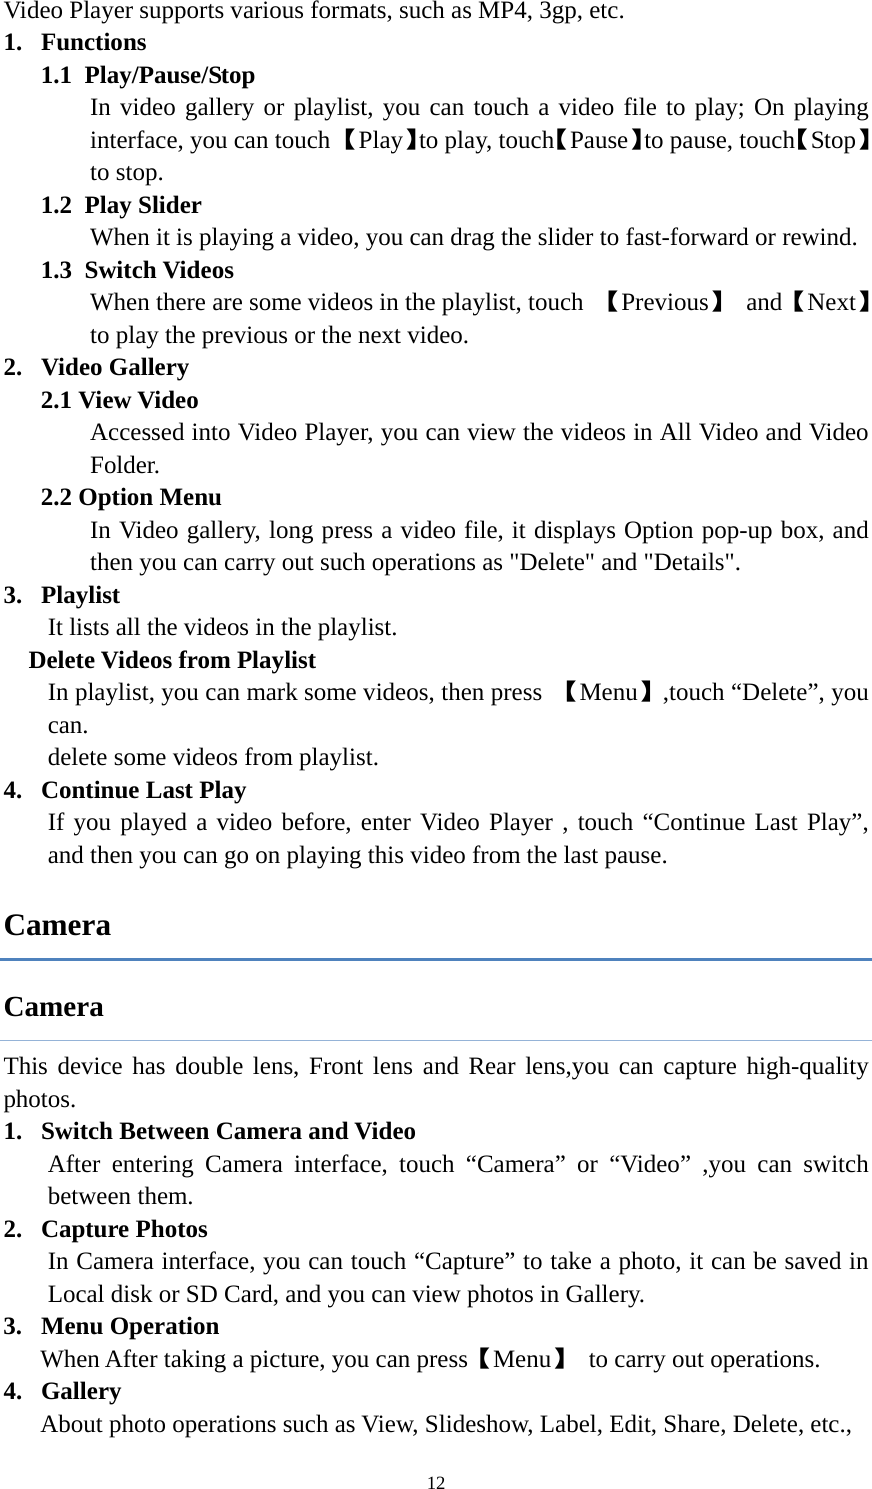  12Video Player supports various formats, such as MP4, 3gp, etc.   1. Functions  1.1 Play/Pause/Stop In video gallery or playlist, you can touch a video file to play; On playing interface, you can touch 【Play】to play, touch【Pause】to pause, touch【Stop】to stop. 1.2 Play Slider When it is playing a video, you can drag the slider to fast-forward or rewind. 1.3 Switch Videos When there are some videos in the playlist, touch  【Previous】 and【Next】 to play the previous or the next video. 2. Video Gallery 2.1 View Video Accessed into Video Player, you can view the videos in All Video and Video Folder. 2.2 Option Menu In Video gallery, long press a video file, it displays Option pop-up box, and then you can carry out such operations as &quot;Delete&quot; and &quot;Details&quot;. 3. Playlist It lists all the videos in the playlist.   Delete Videos from Playlist In playlist, you can mark some videos, then press  【Menu】,touch “Delete”, you can.  delete some videos from playlist. 4. Continue Last Play If you played a video before, enter Video Player , touch “Continue Last Play”, and then you can go on playing this video from the last pause. Camera Camera This device has double lens, Front lens and Rear lens,you can capture high-quality photos. 1. Switch Between Camera and Video After entering Camera interface, touch “Camera” or “Video” ,you can switch between them. 2. Capture Photos In Camera interface, you can touch “Capture” to take a photo, it can be saved in Local disk or SD Card, and you can view photos in Gallery. 3. Menu Operation When After taking a picture, you can press【Menu】  to carry out operations. 4. Gallery About photo operations such as View, Slideshow, Label, Edit, Share, Delete, etc., 